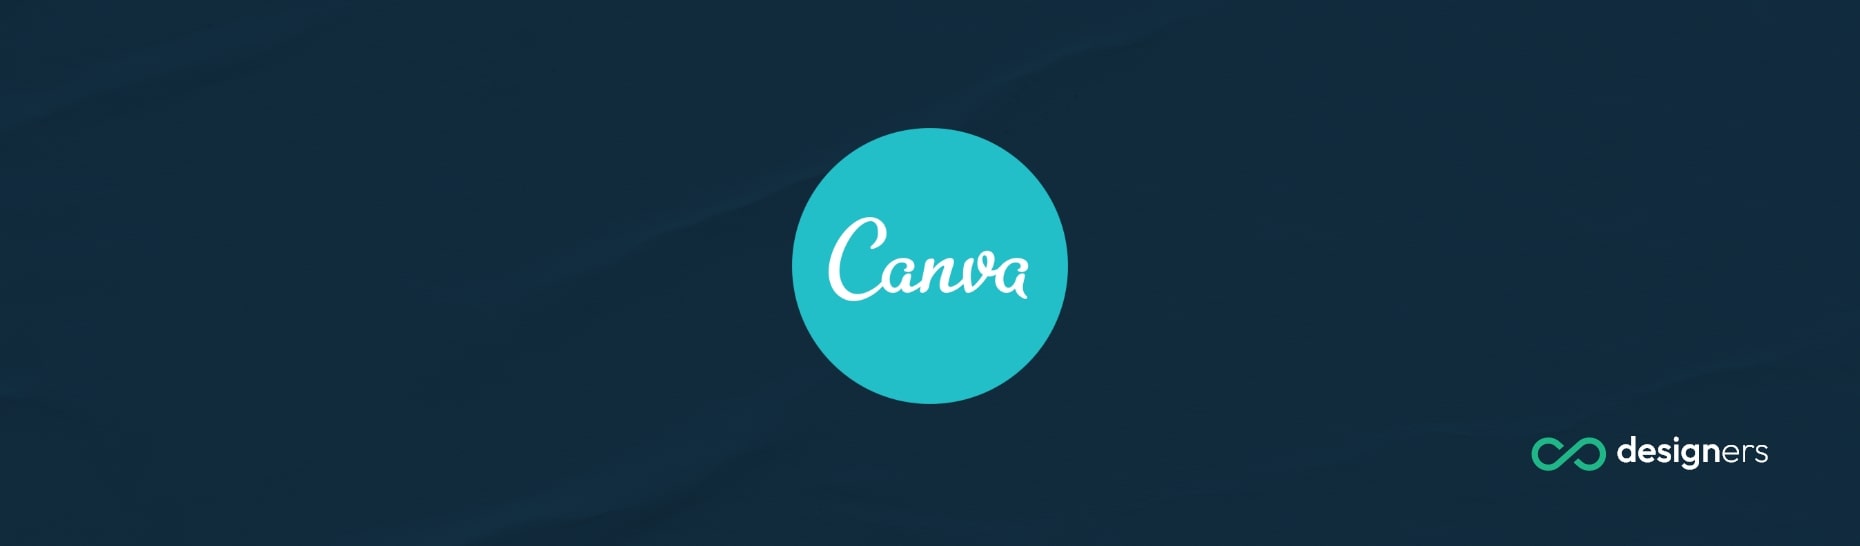 How Do I Convert Canva to PowerPoint?